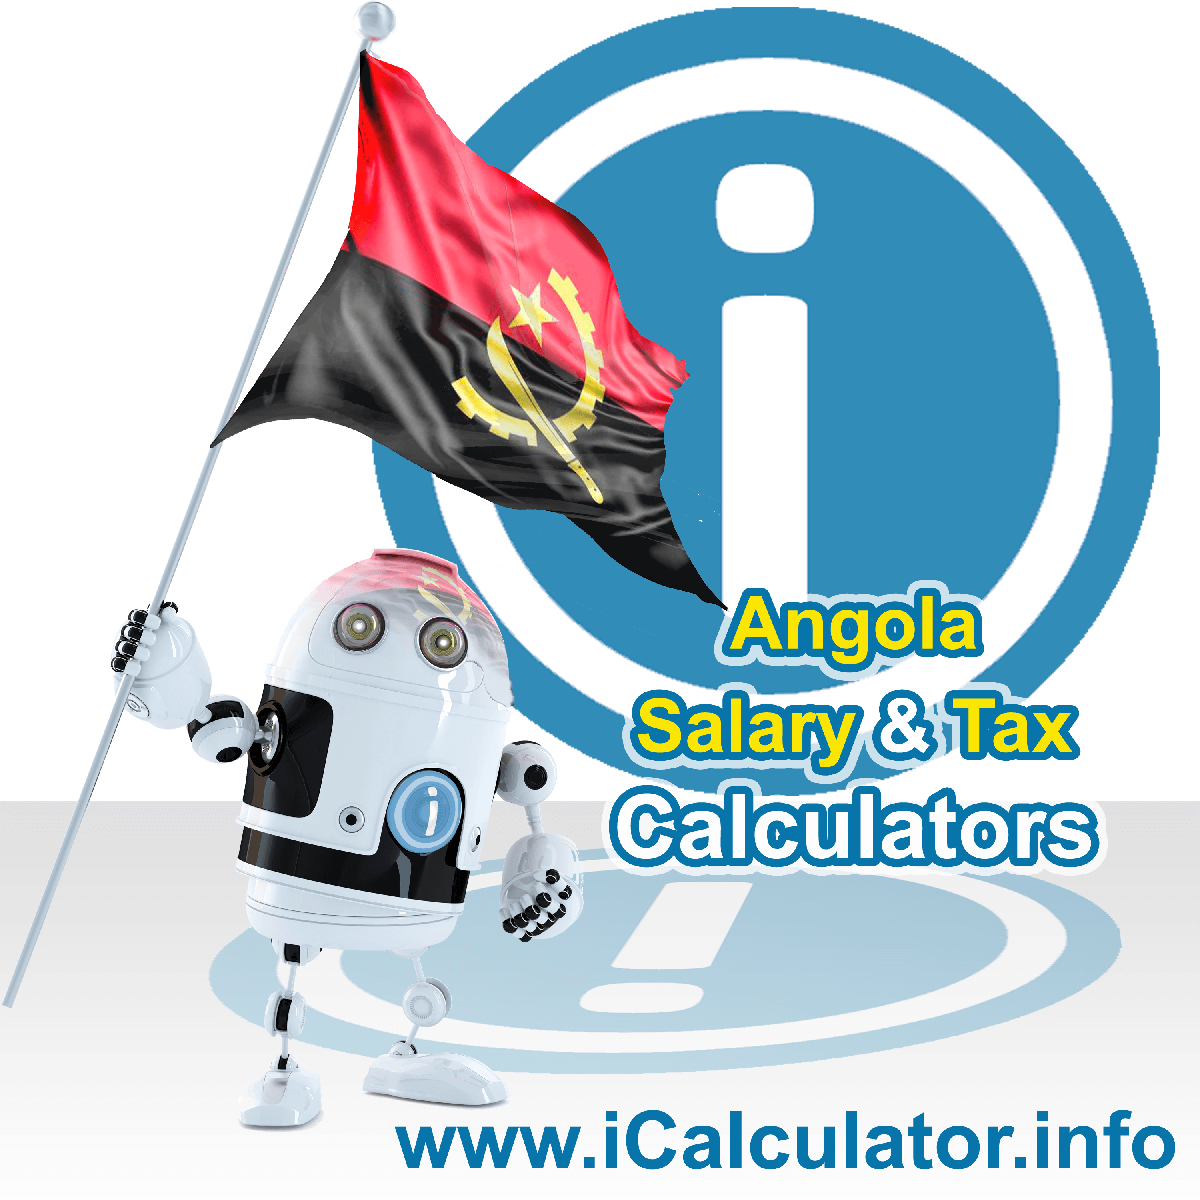 Angola Tax Calculator. This image shows the Angola flag and information relating to the tax formula for the Angola Salary Calculator